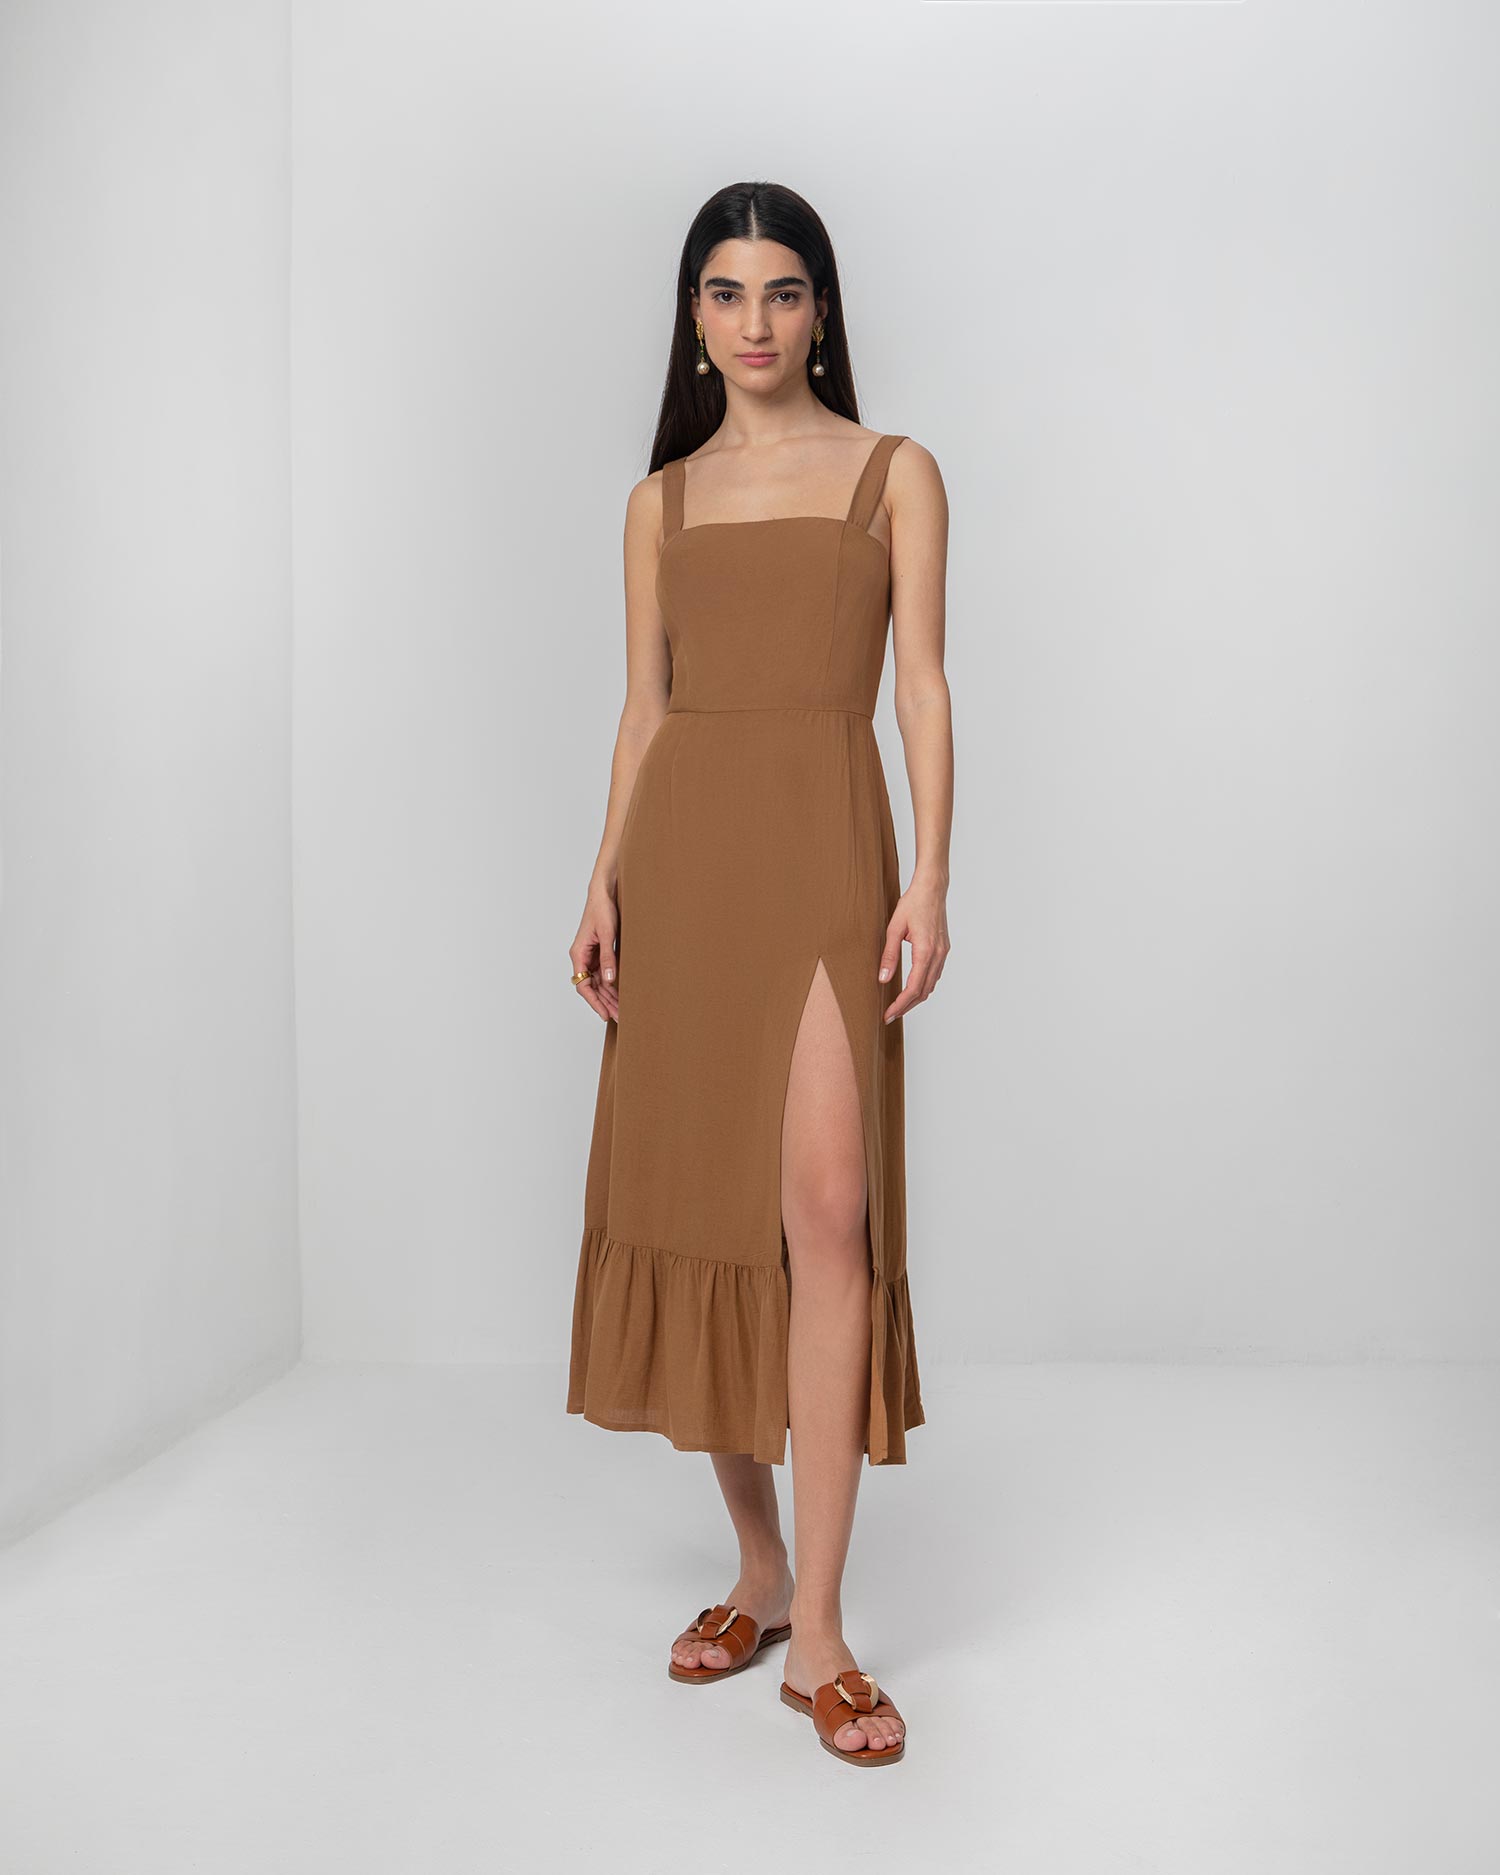 Forever Young Anastasia dress